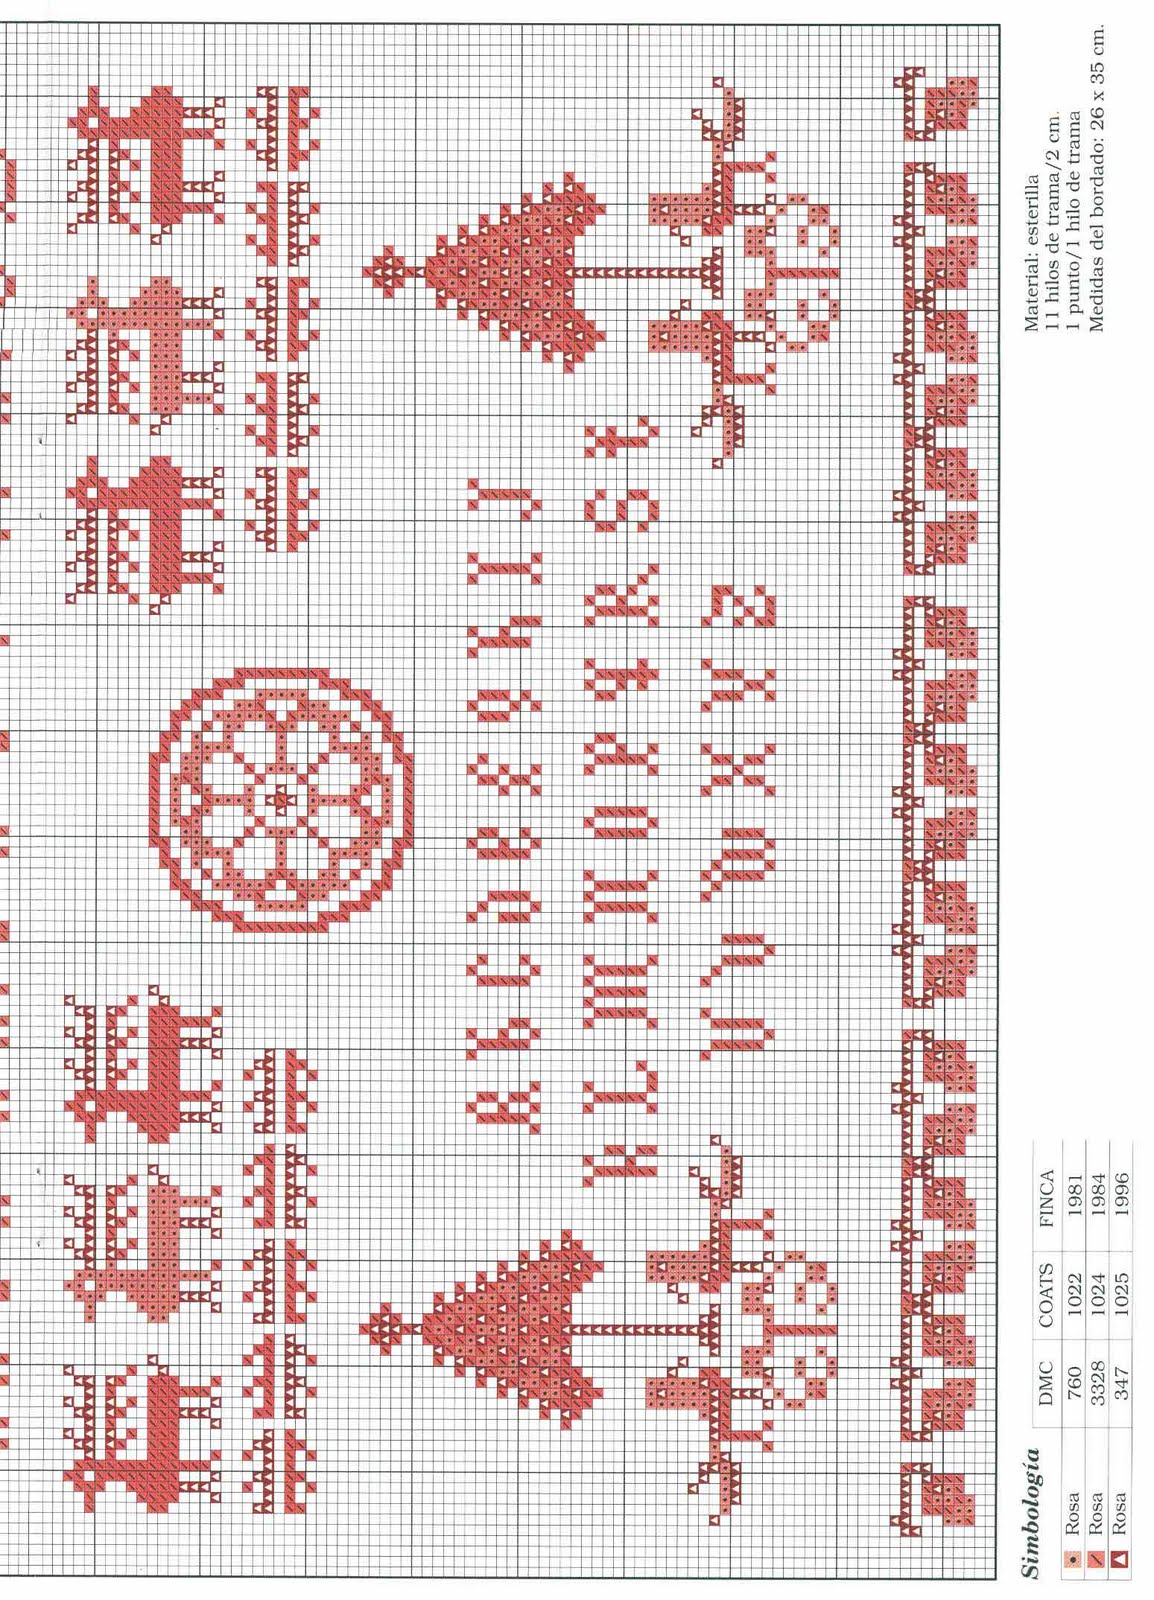 Red cross stitch sampler with various shapes and symbols (3)